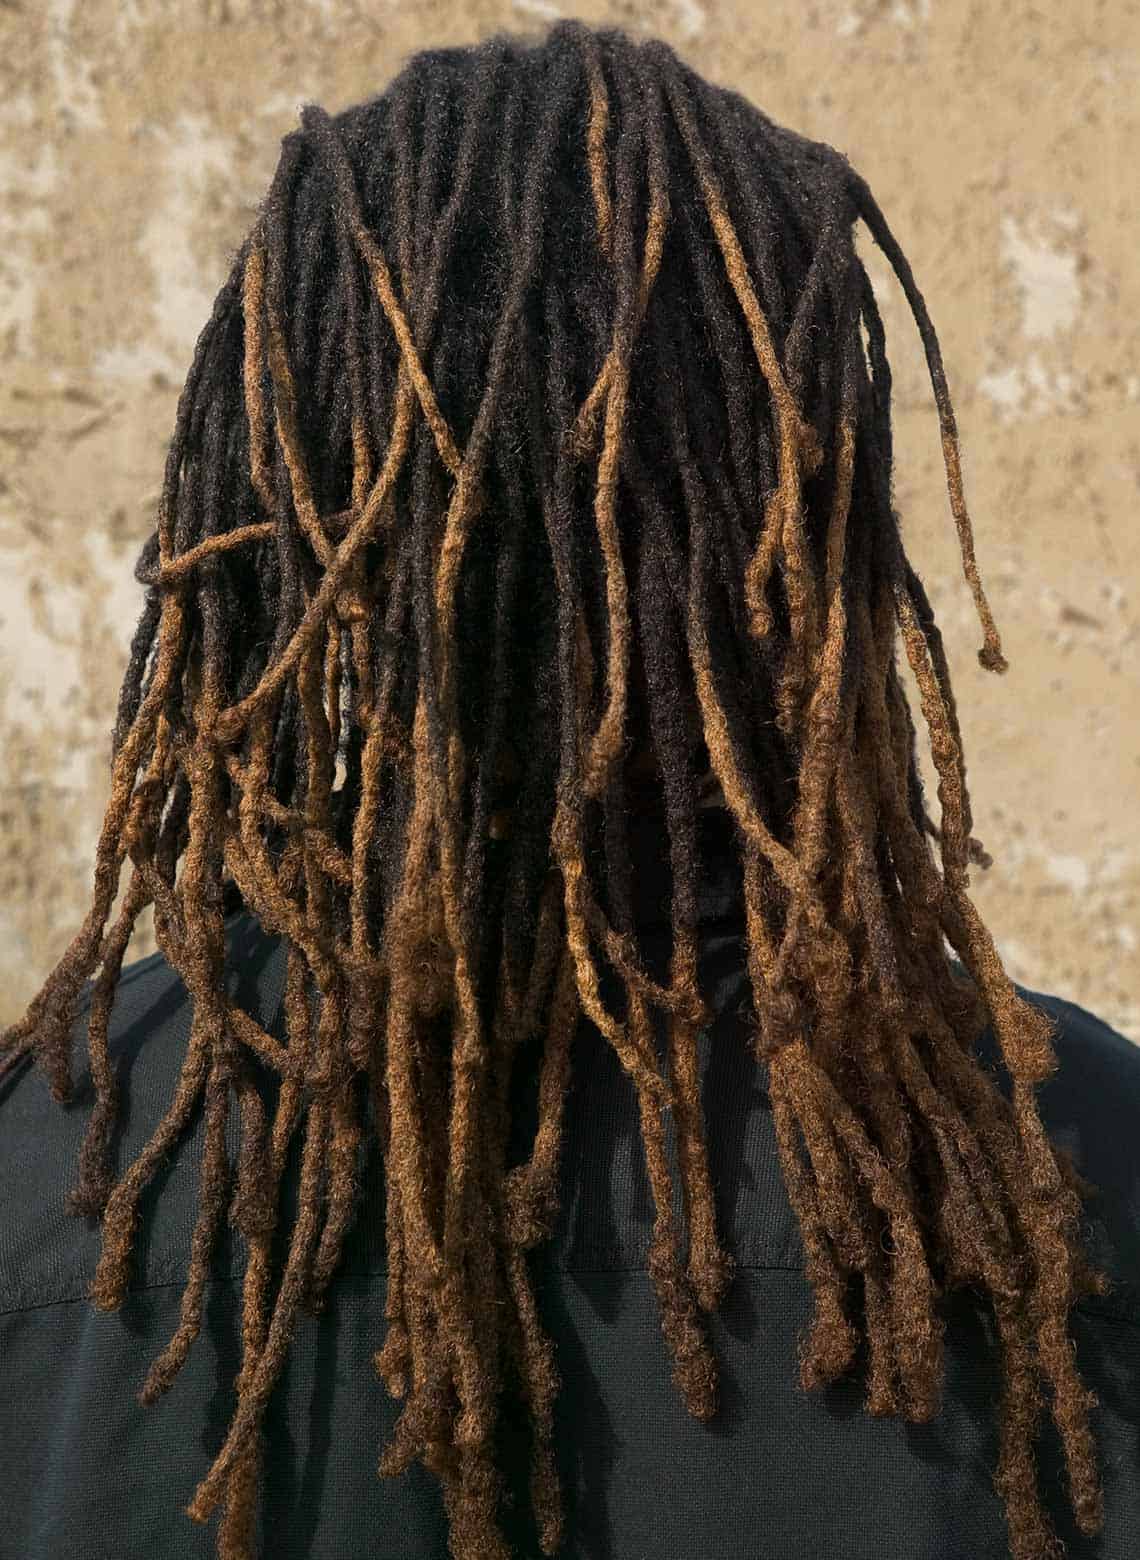 person with dread highlights